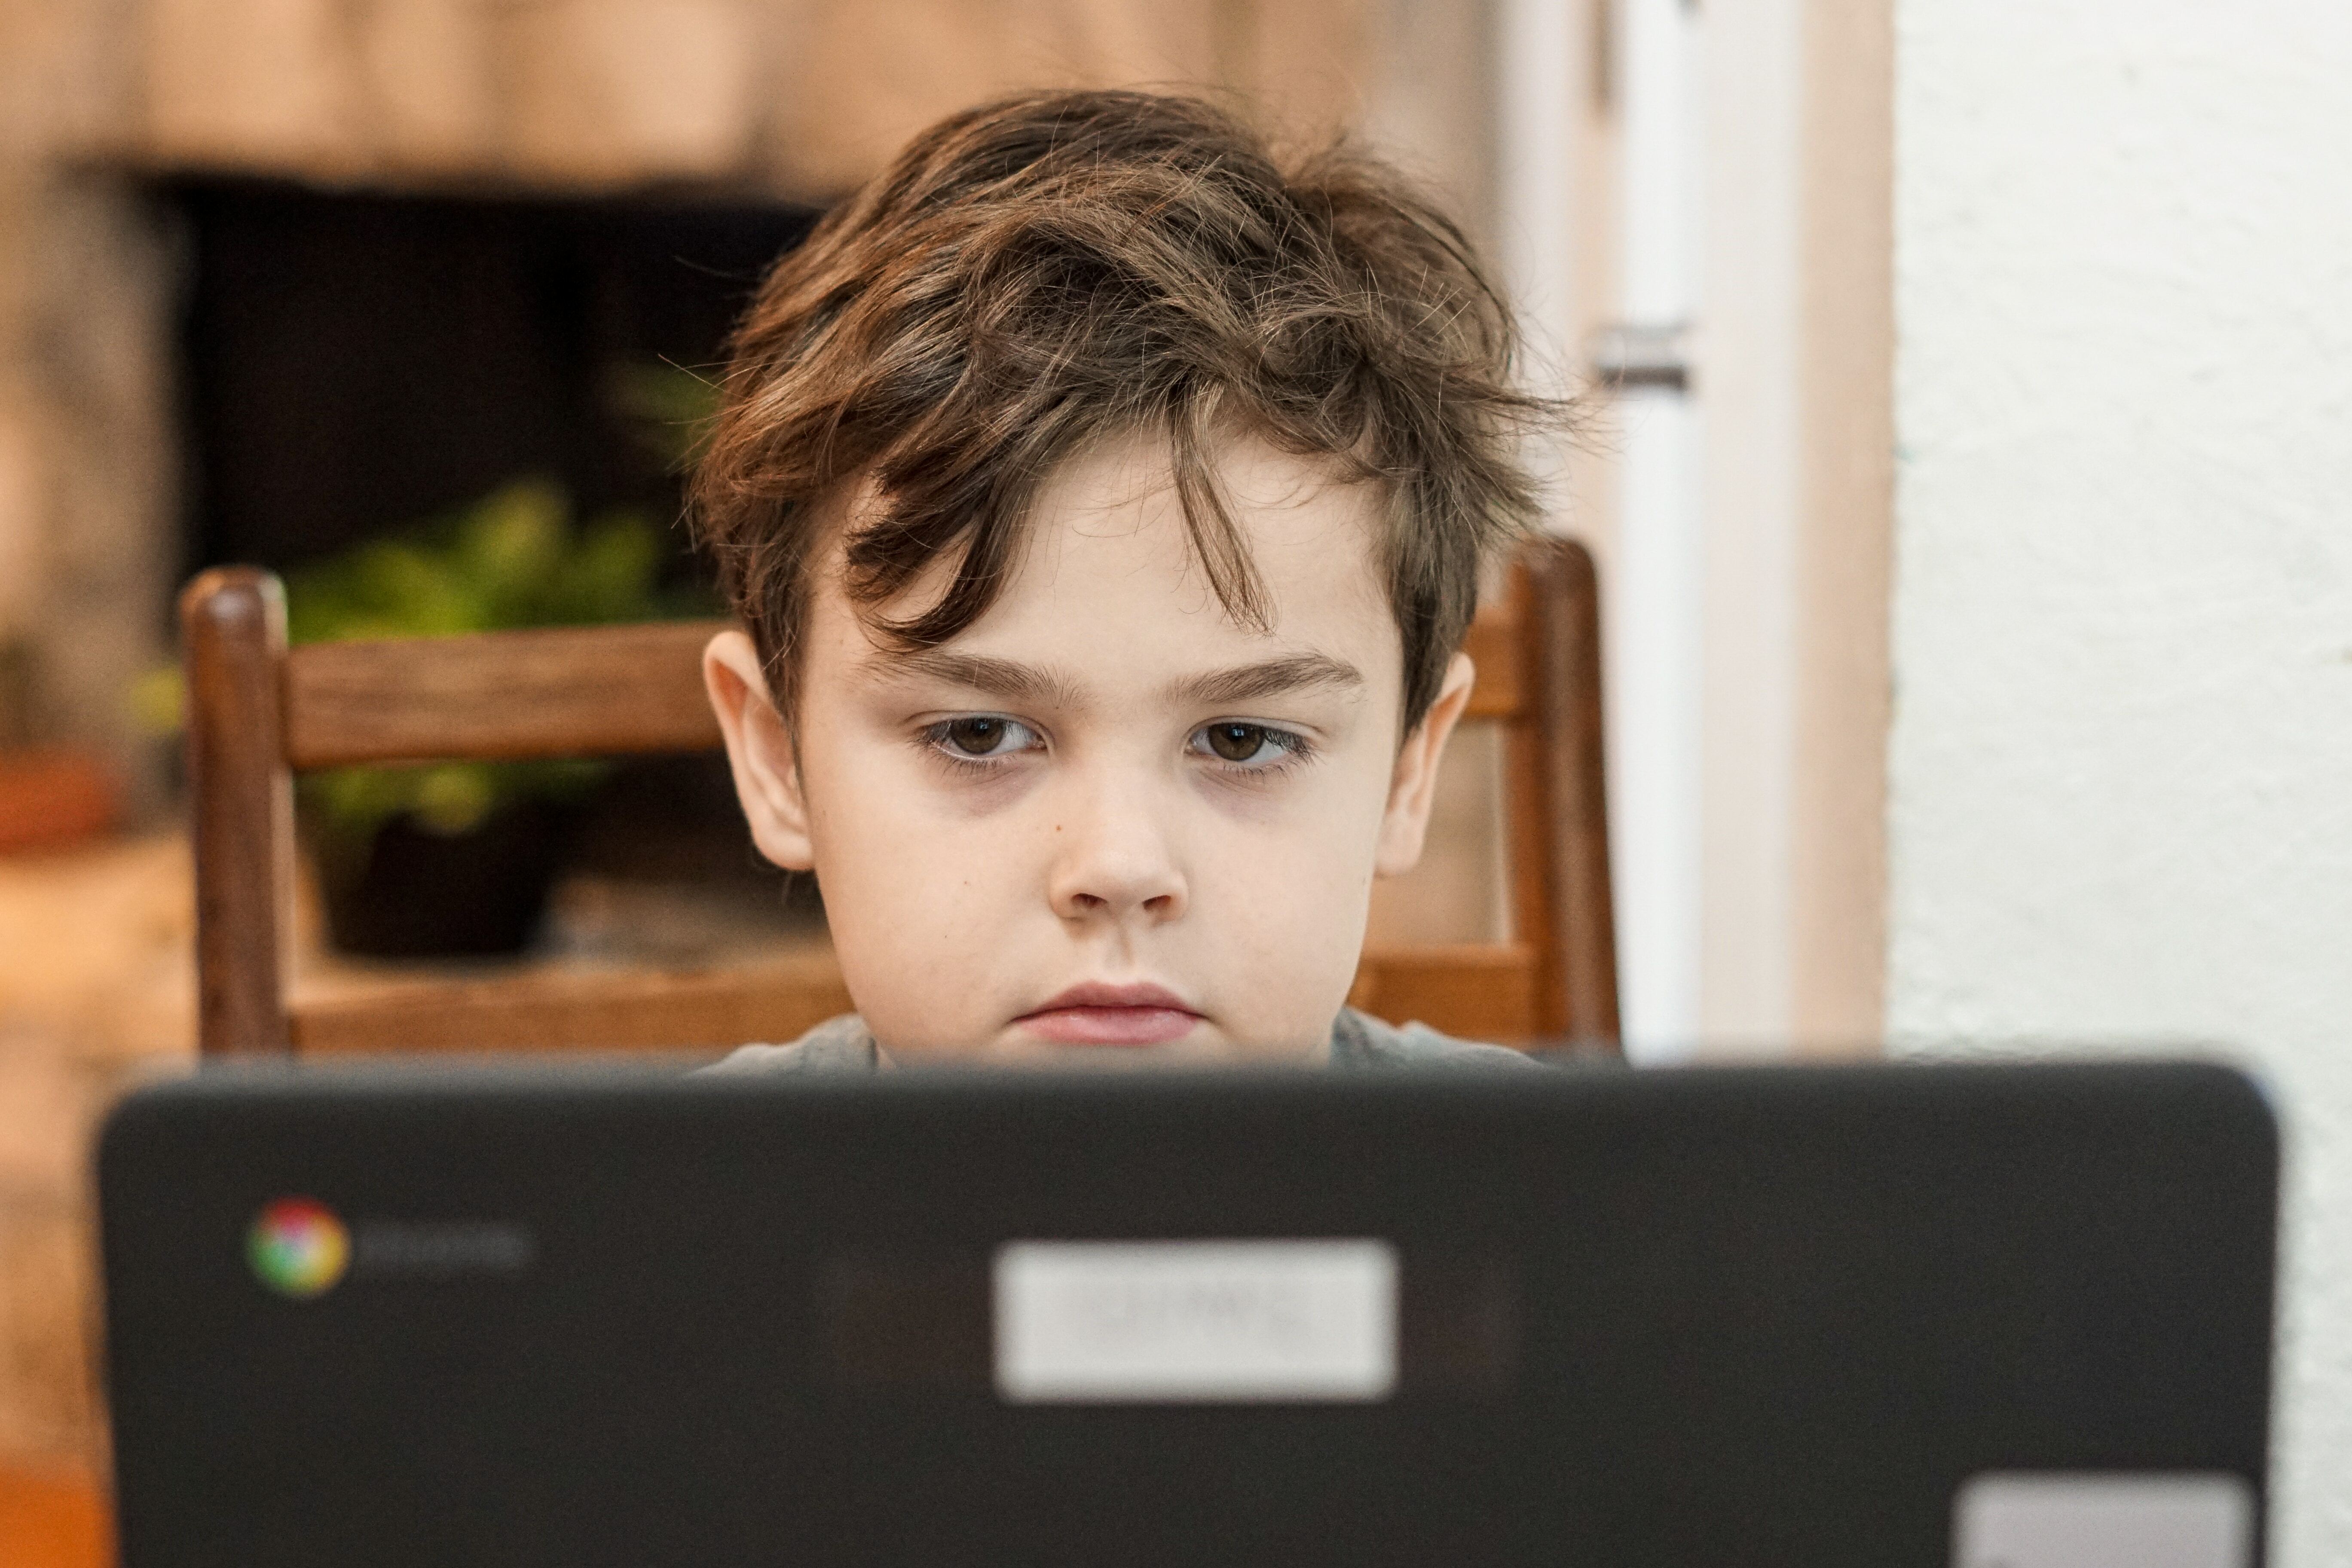 Boy in front of laptop